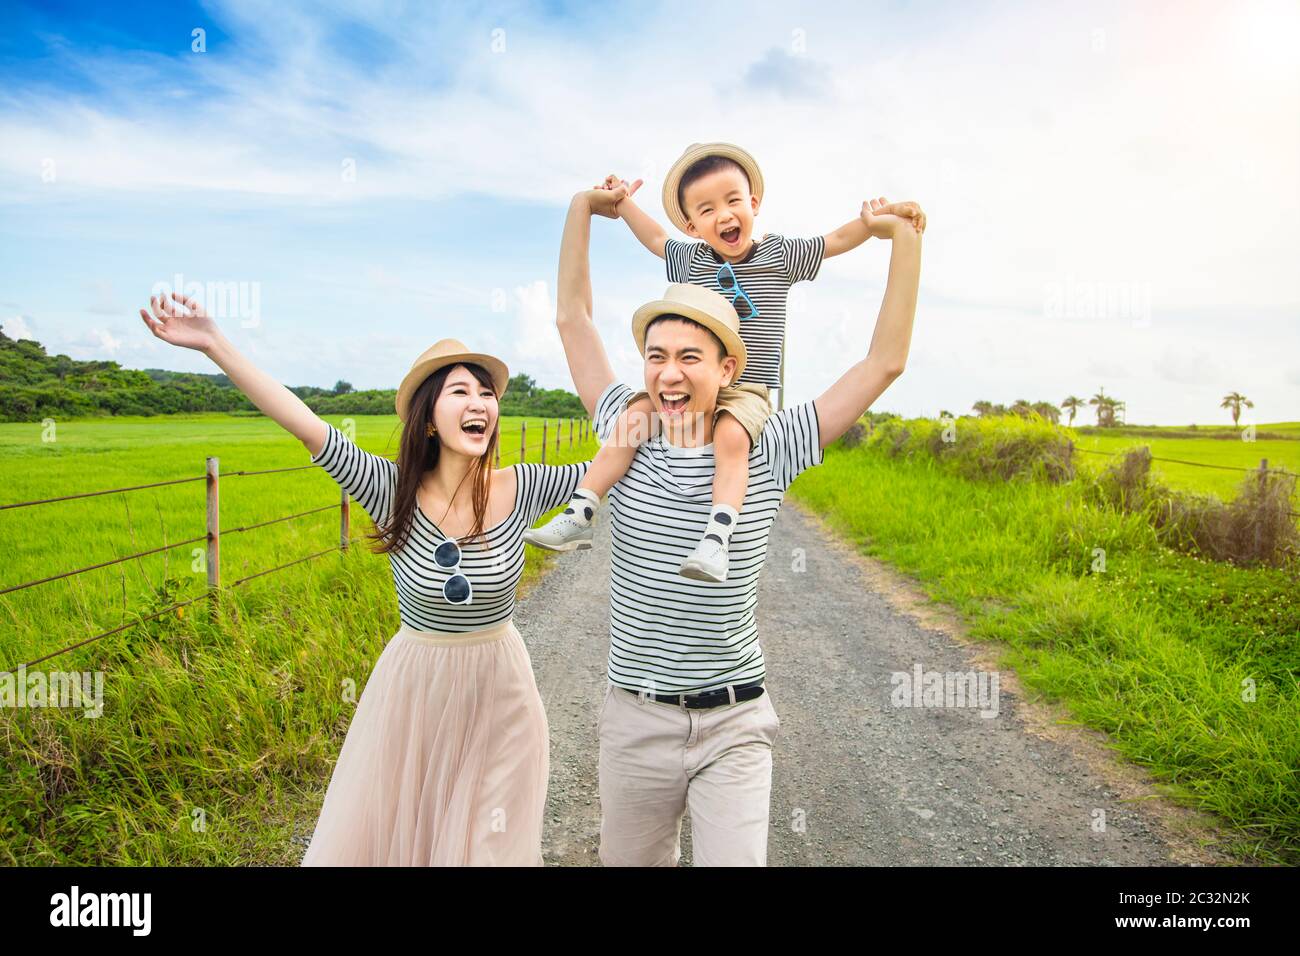 happy family having fun and walking on the country road Stock Photo